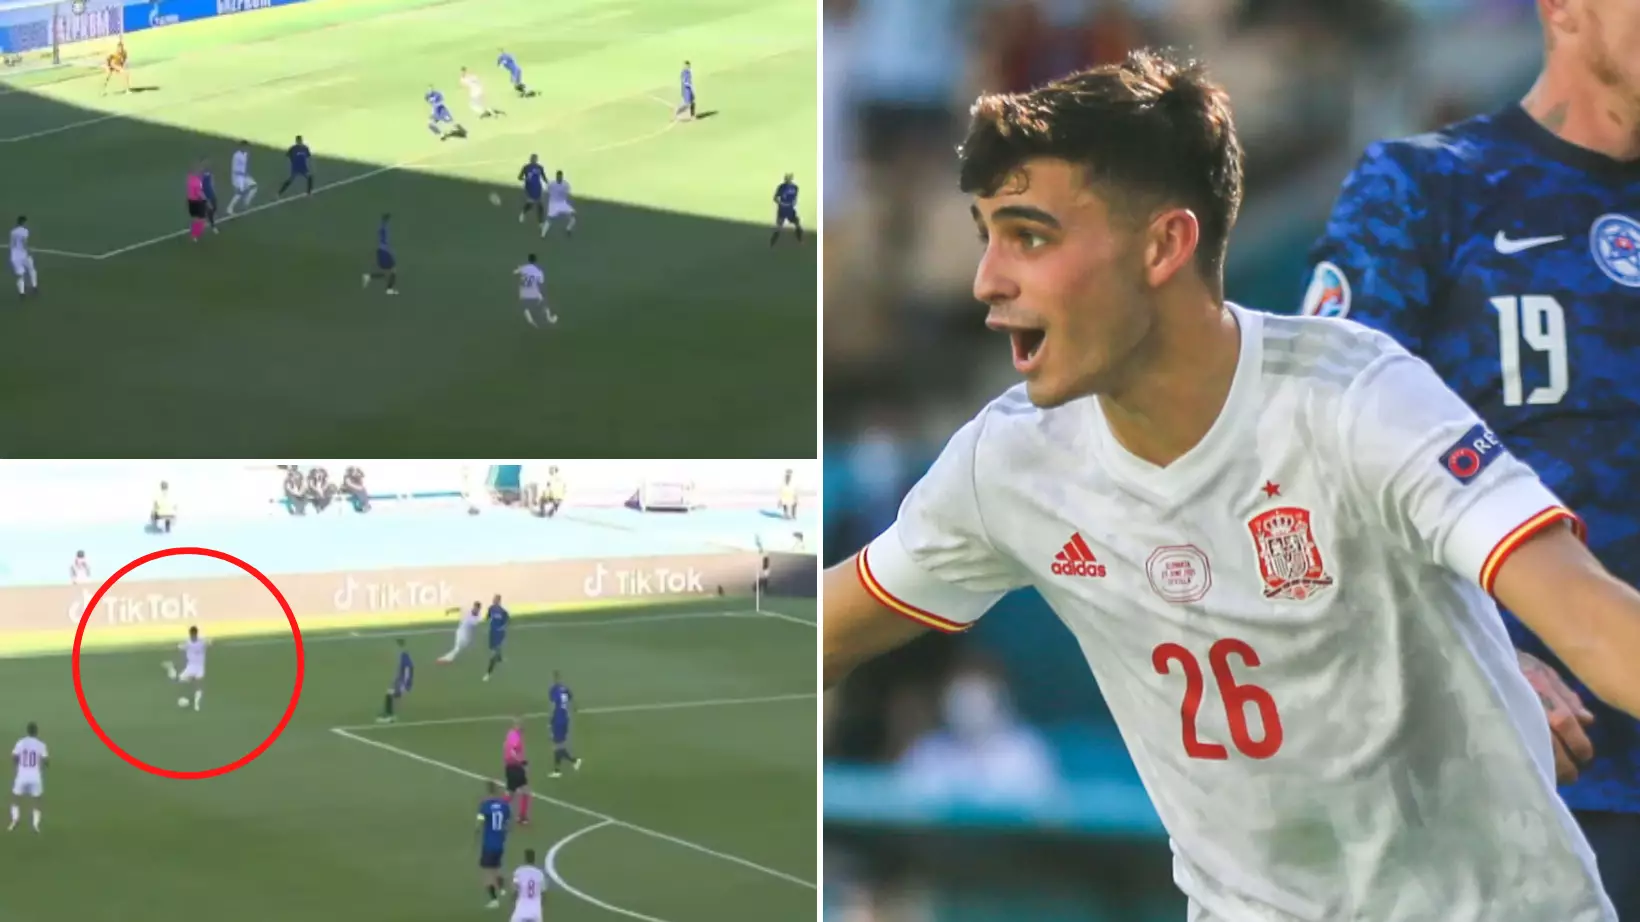 Compilation Of Pedri's 'Generational' Performance vs. Slovakia Shows He's Already A Superstar